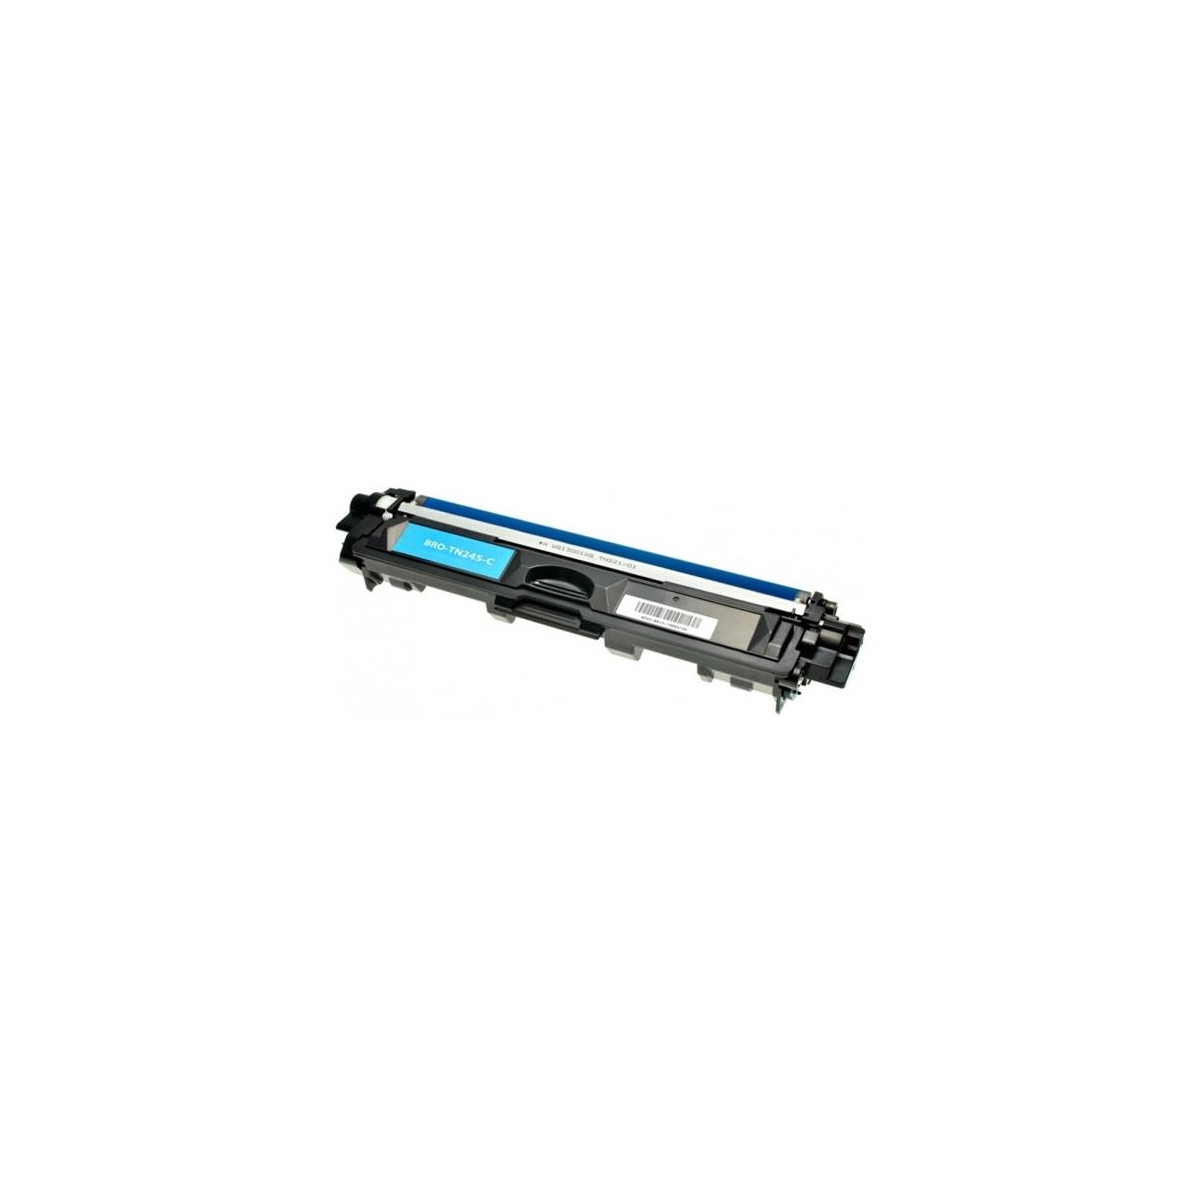 TN-246 C Toner laser compatible Brother - Cyan